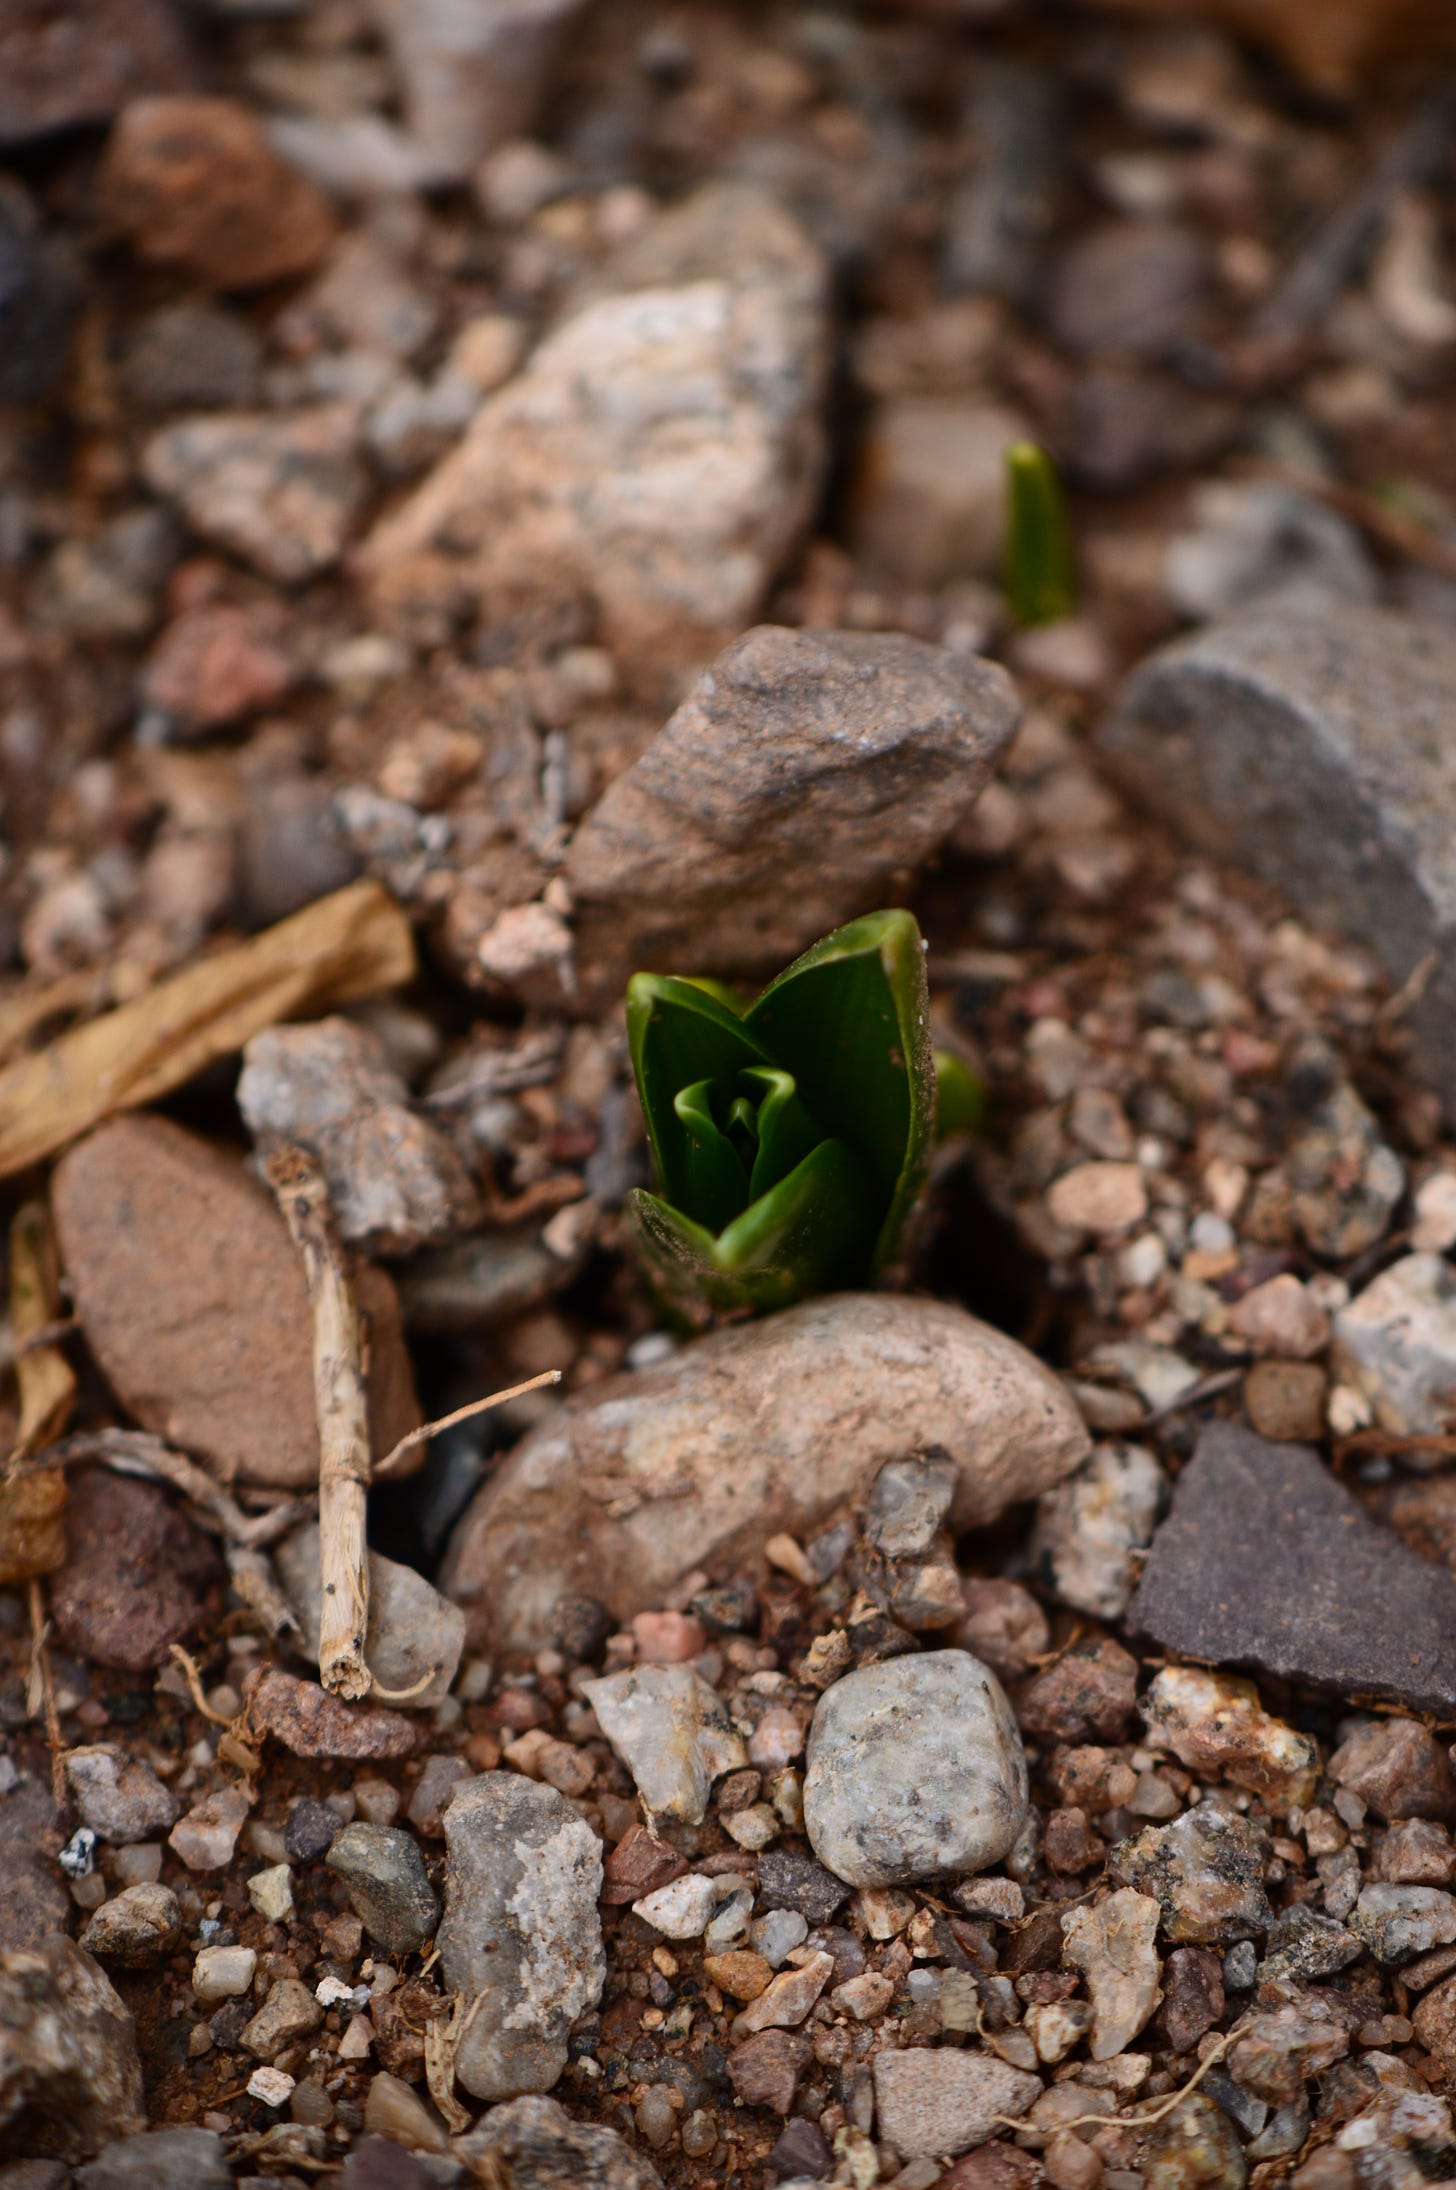 Roman hyacinth just sprouting